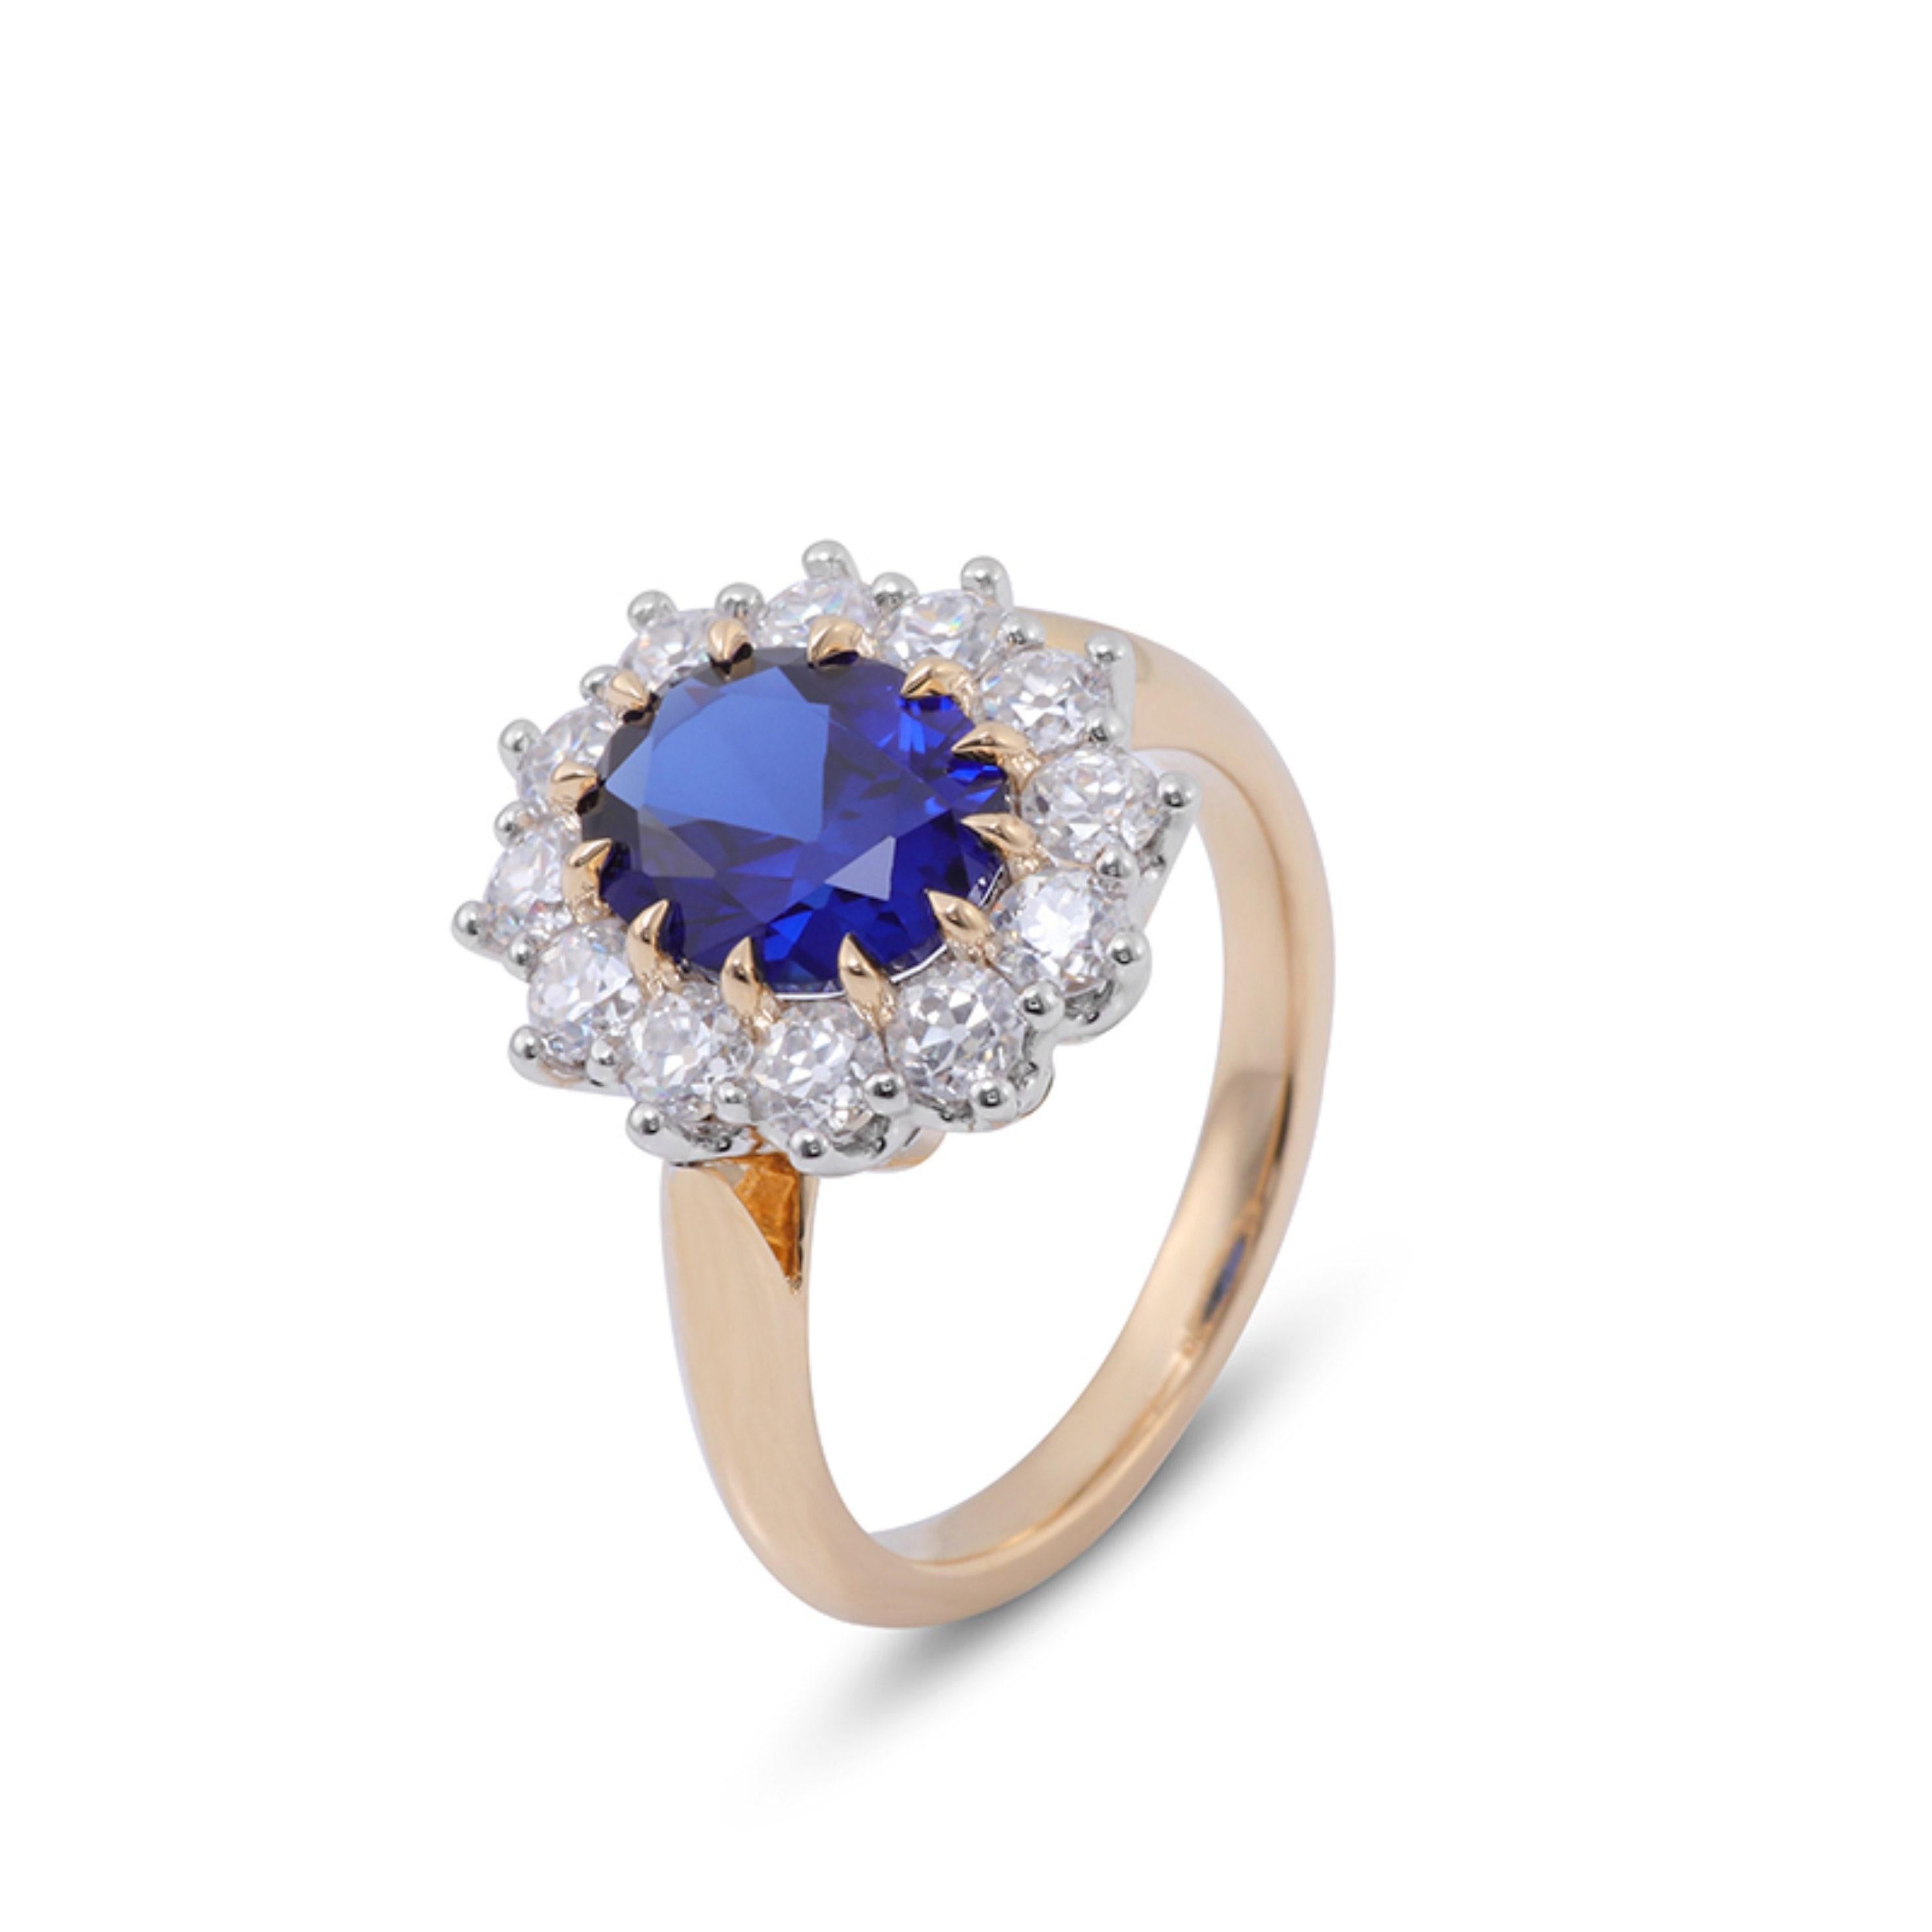 For Sale:  2 Carat Natural Sapphire Diamond Engagement Ring Set in 18K Gold, Cocktail Ring 3